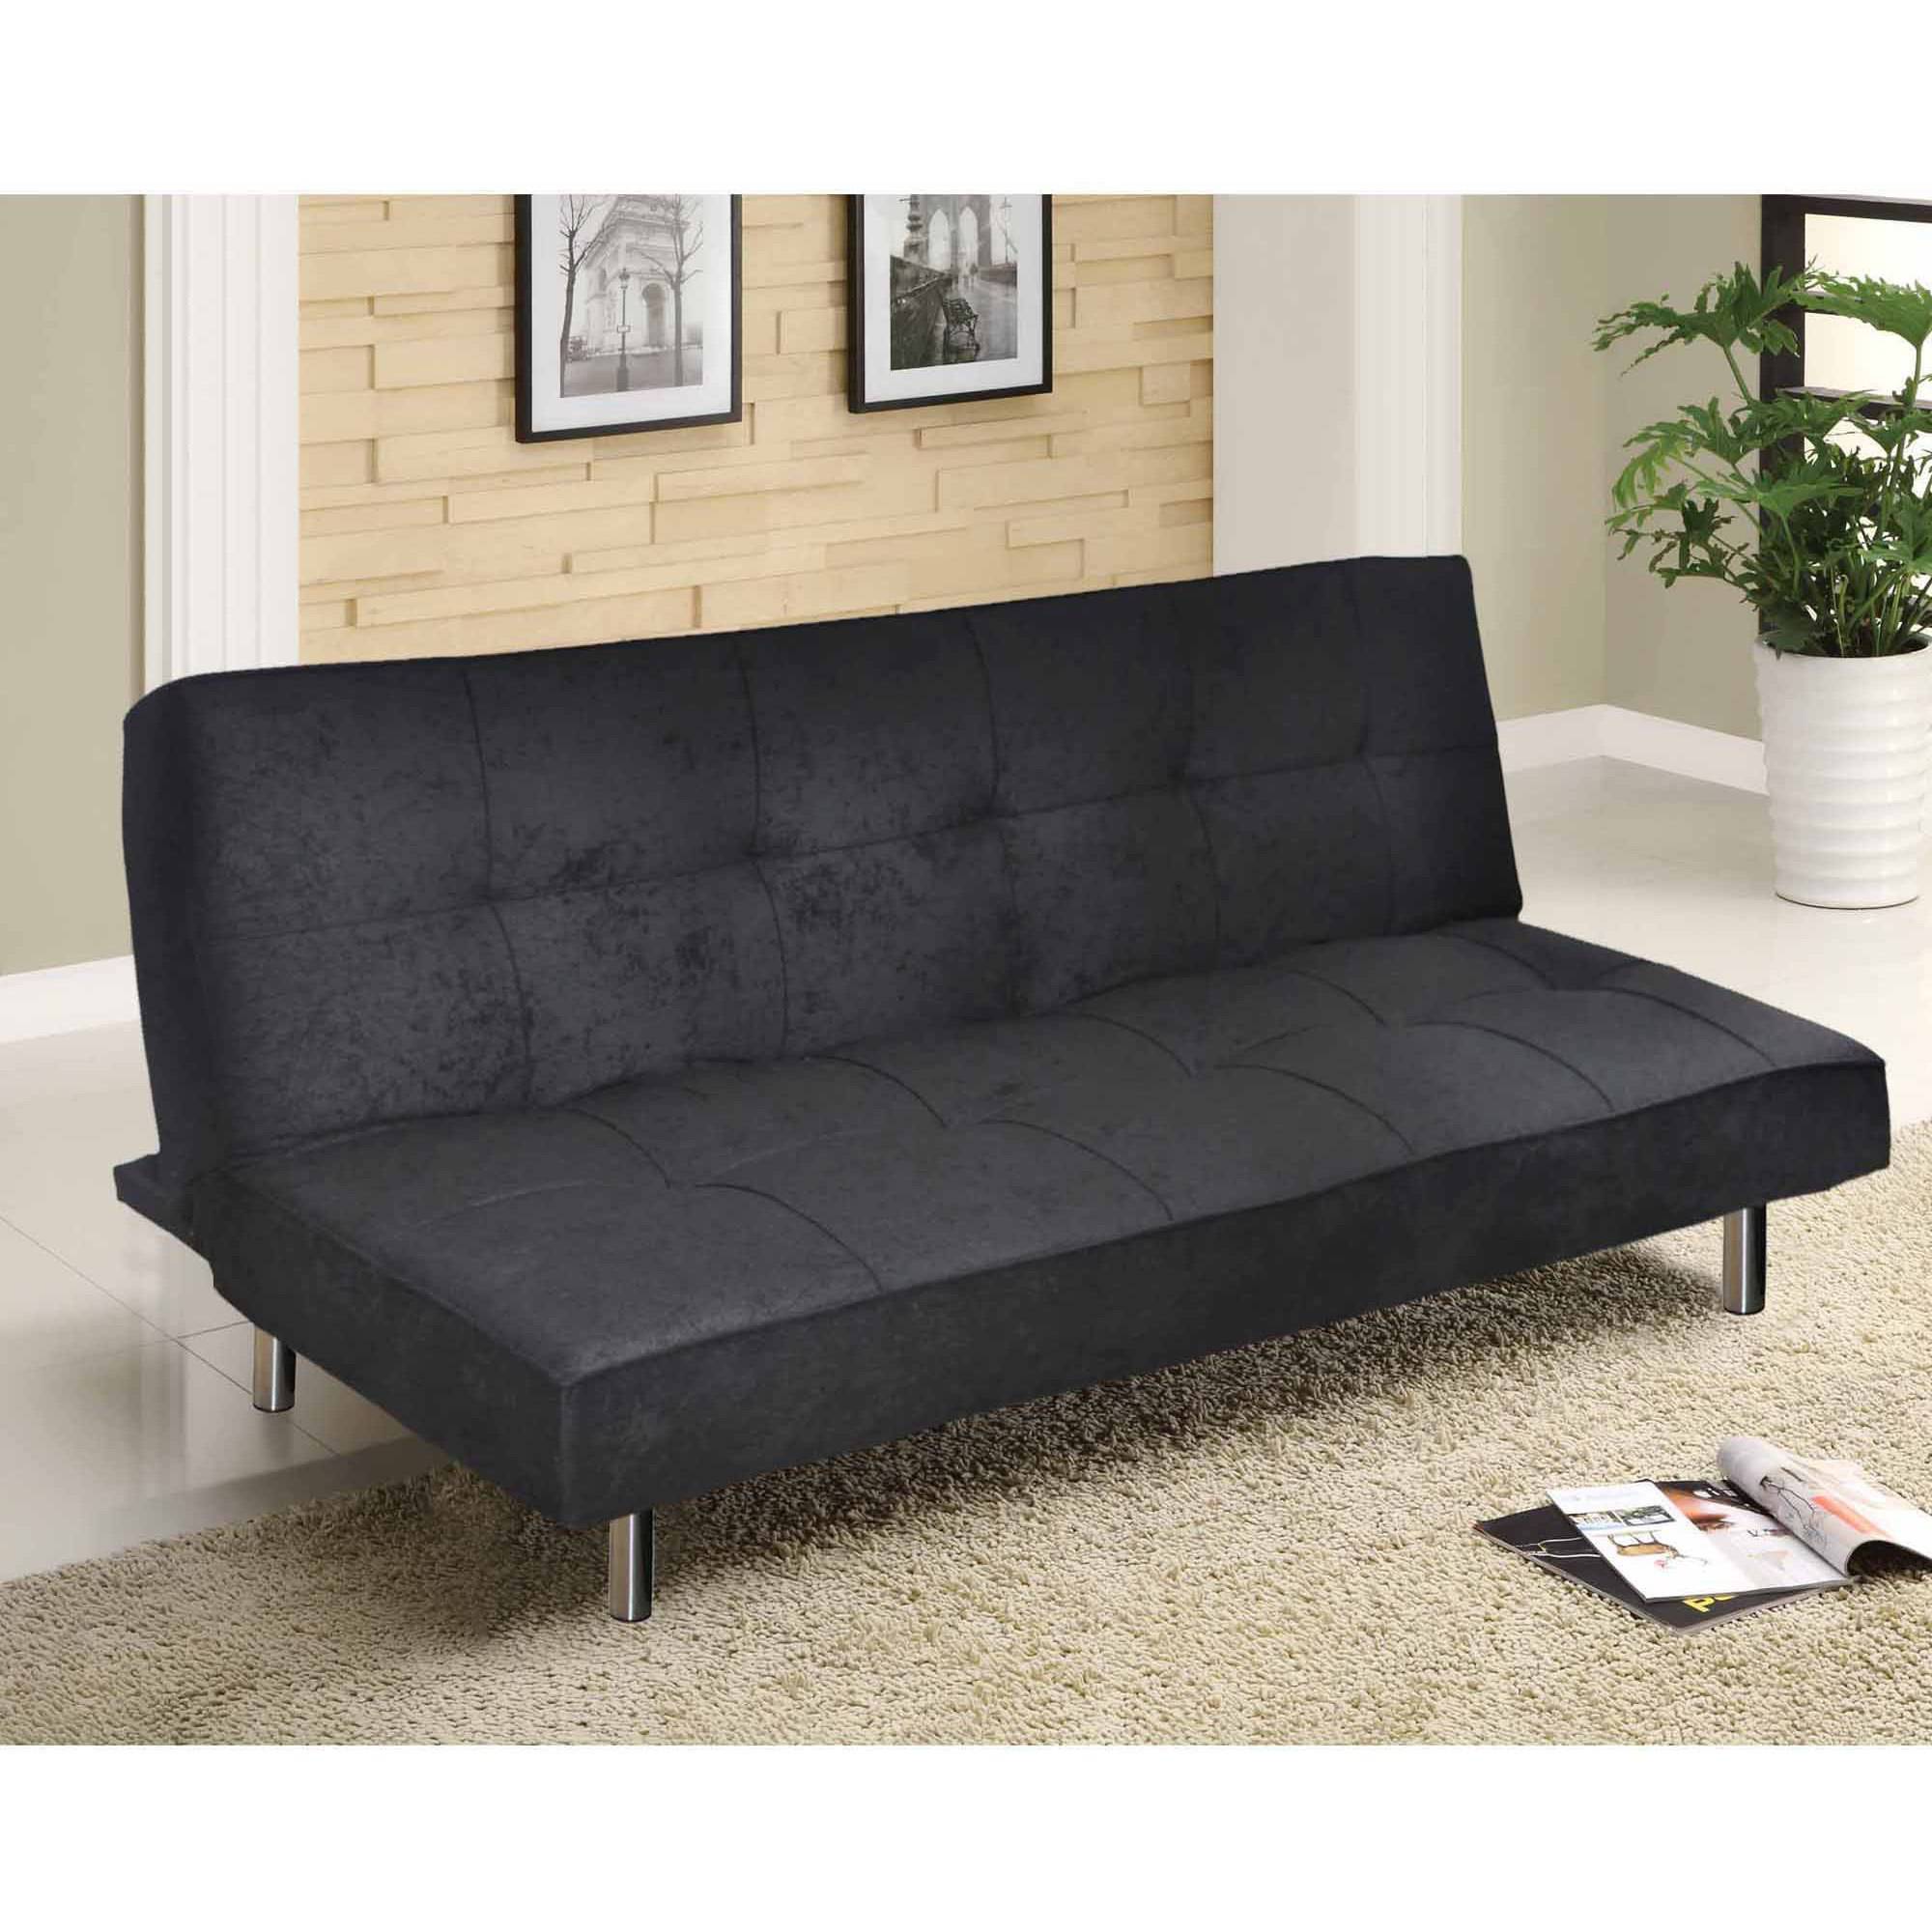 best choice products modern entertainment futon sofa bed fold up u0026 down FCBTOZT